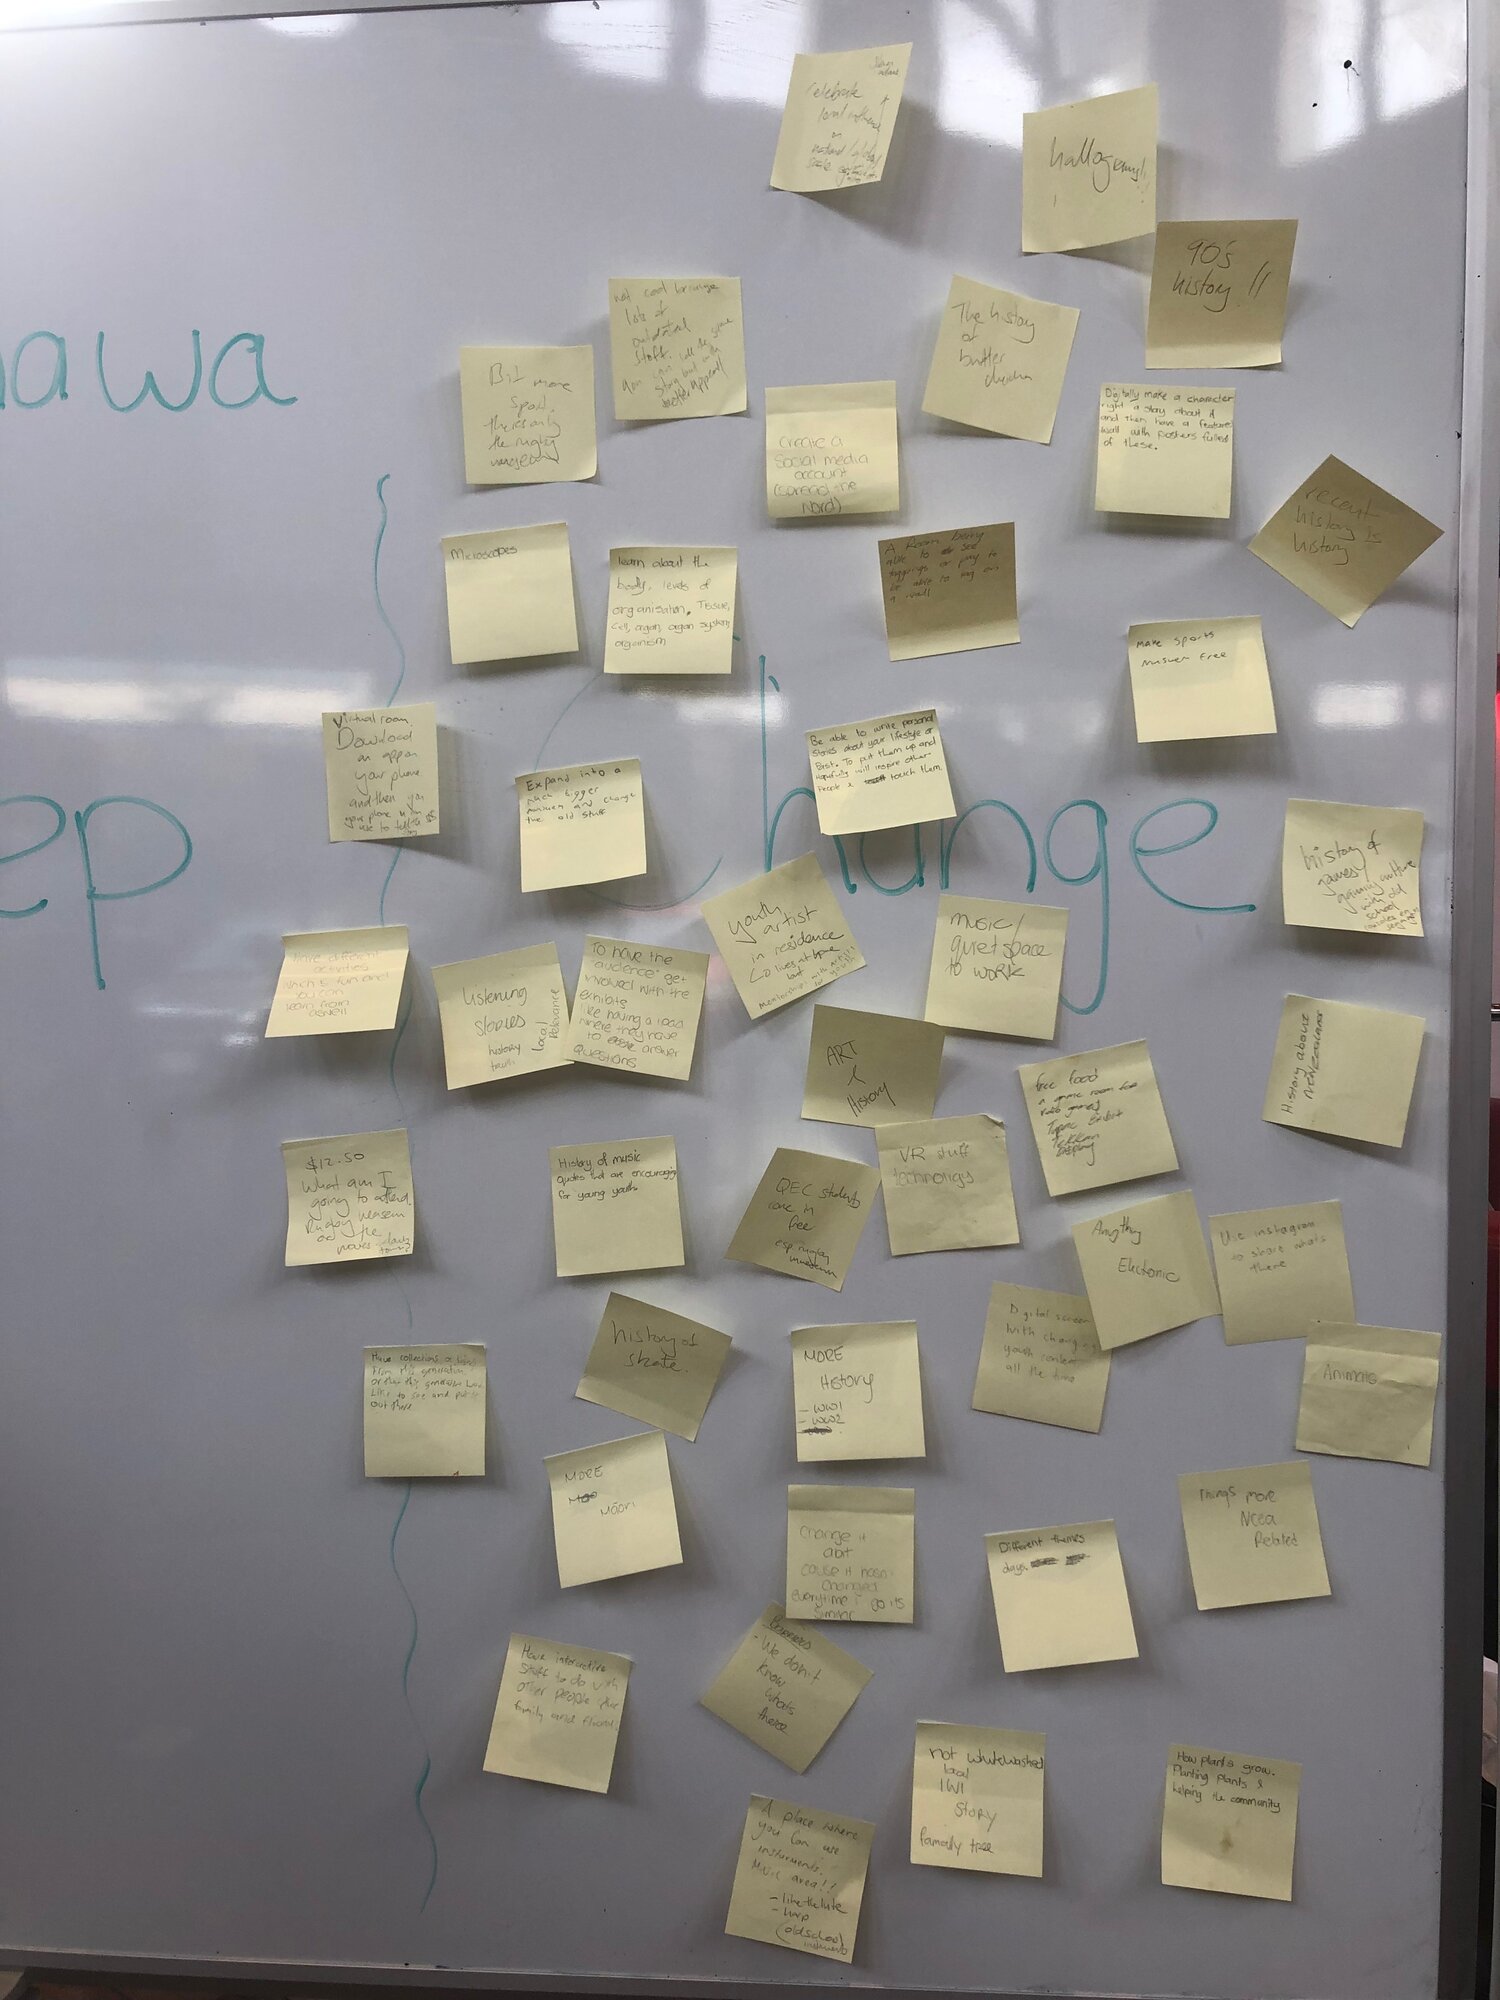 The Post-its on the board are the ideas generated by the young people during the Chuck, Keep, Change activity with Te Manawa staff (Photo: Youth Space)